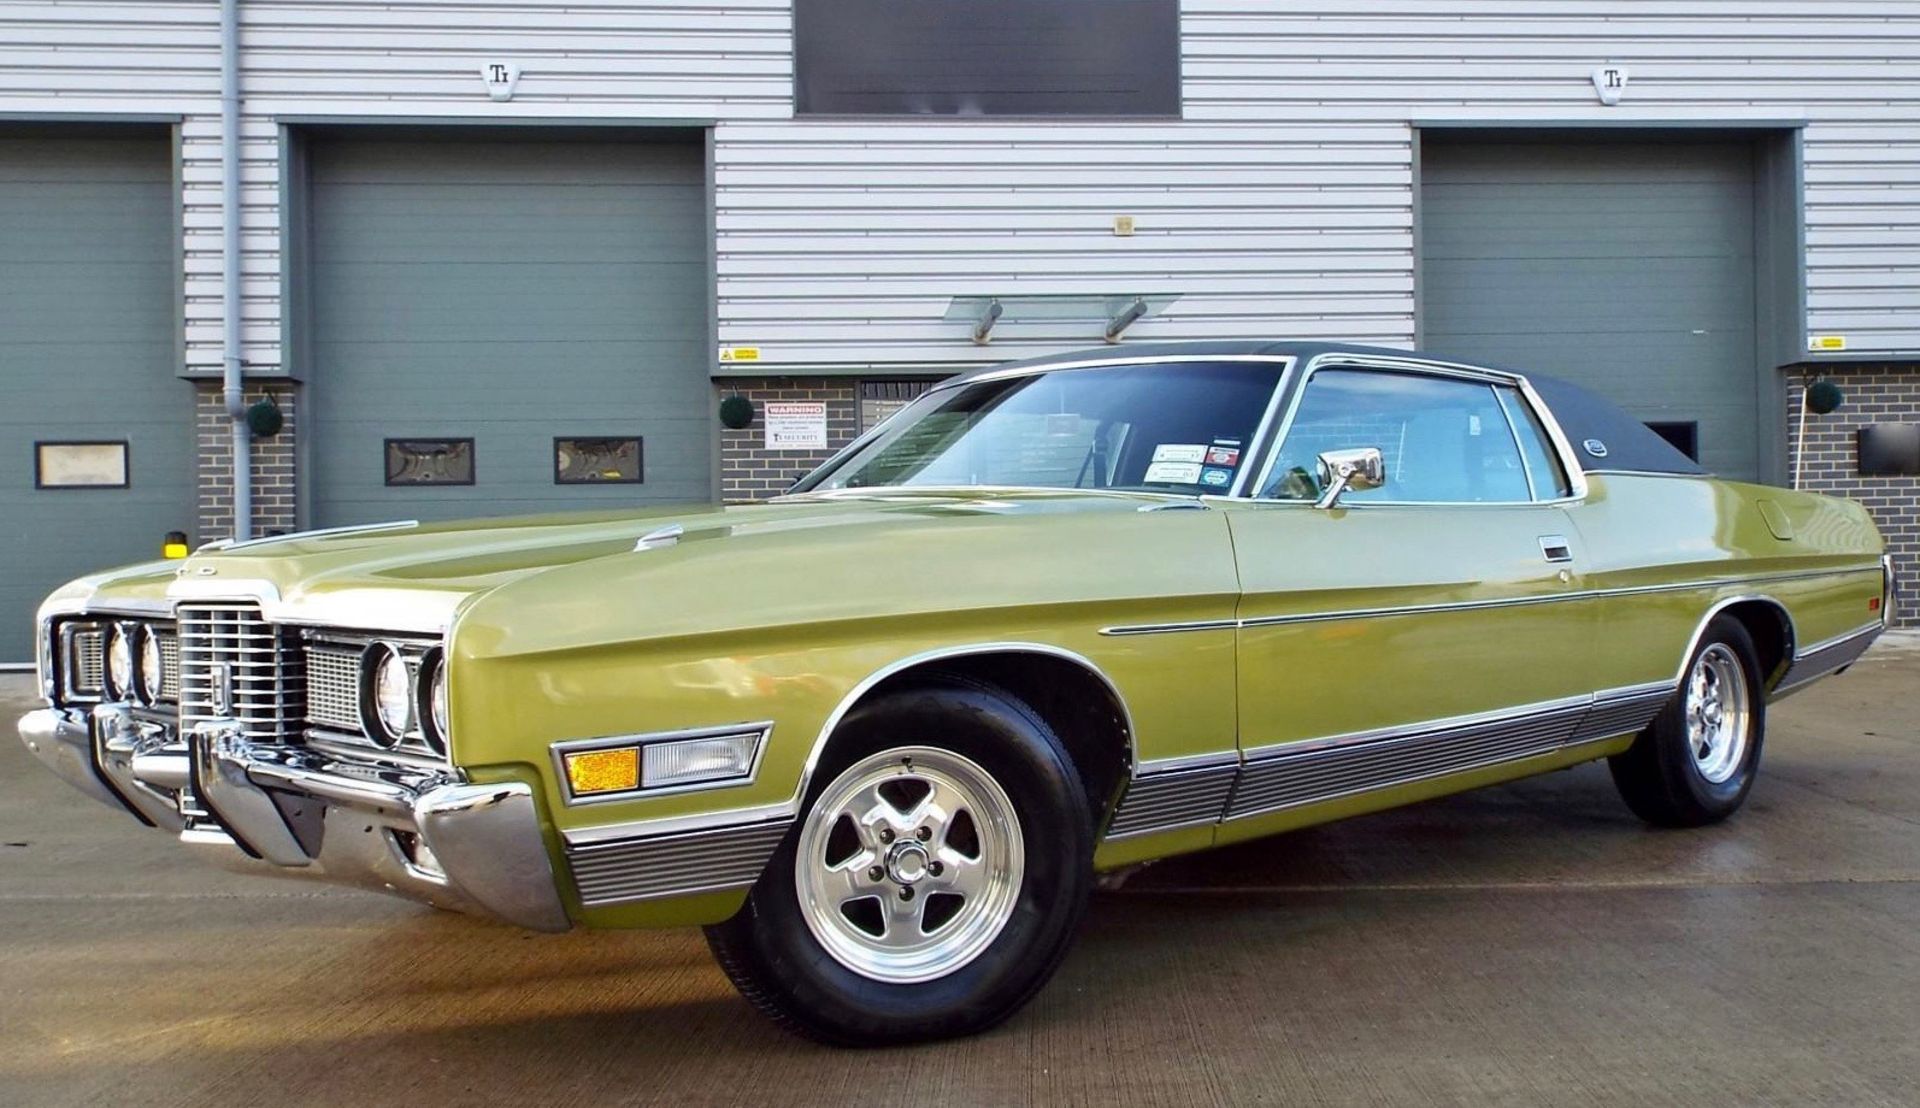 1972 Ford Galaxie 5.8 V8 Ltd Pure Original Example - Image 2 of 13